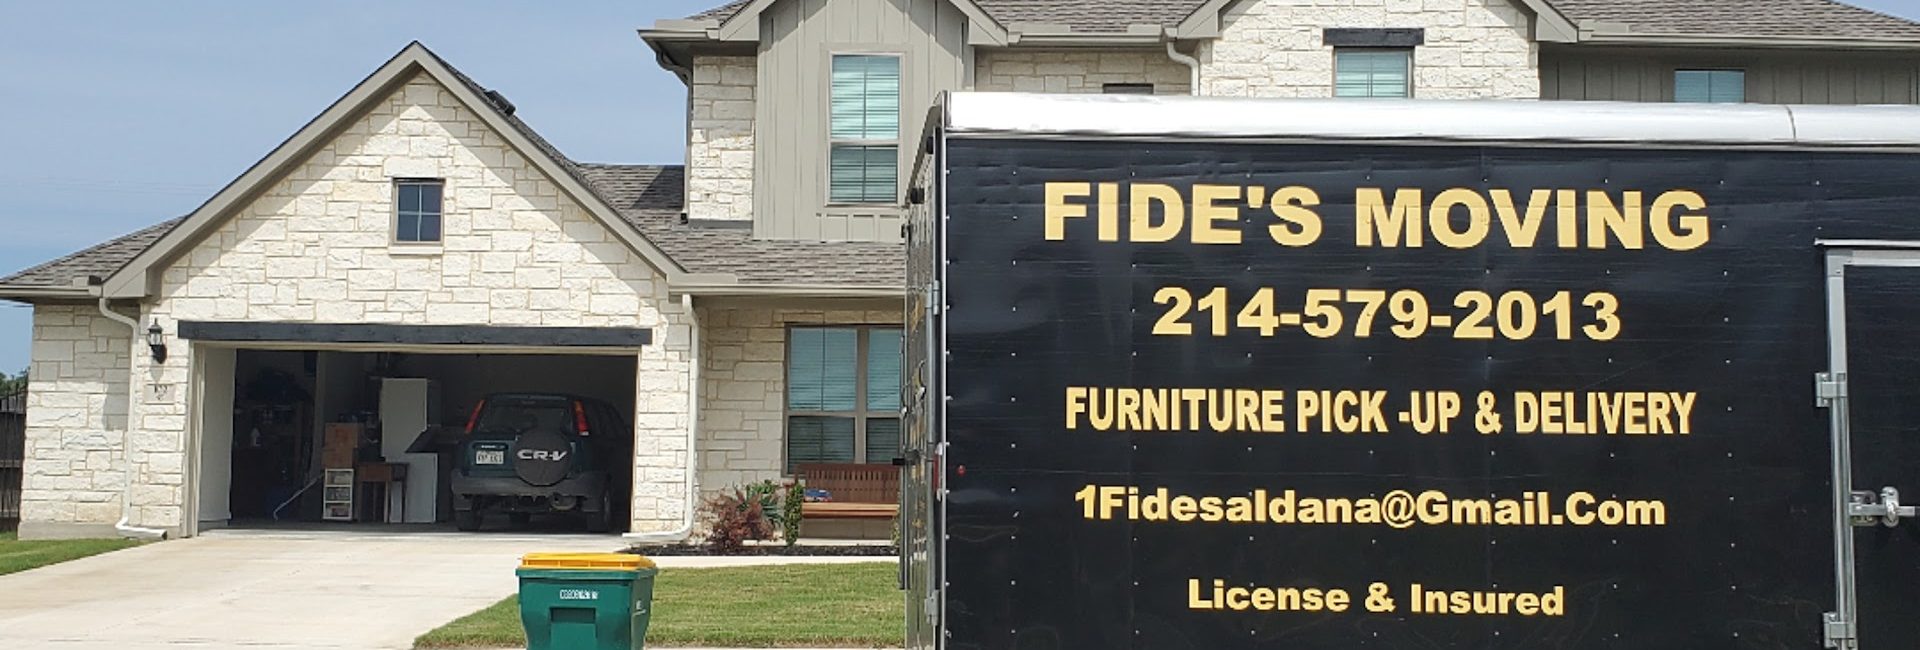 Fide’s Moving Services 2